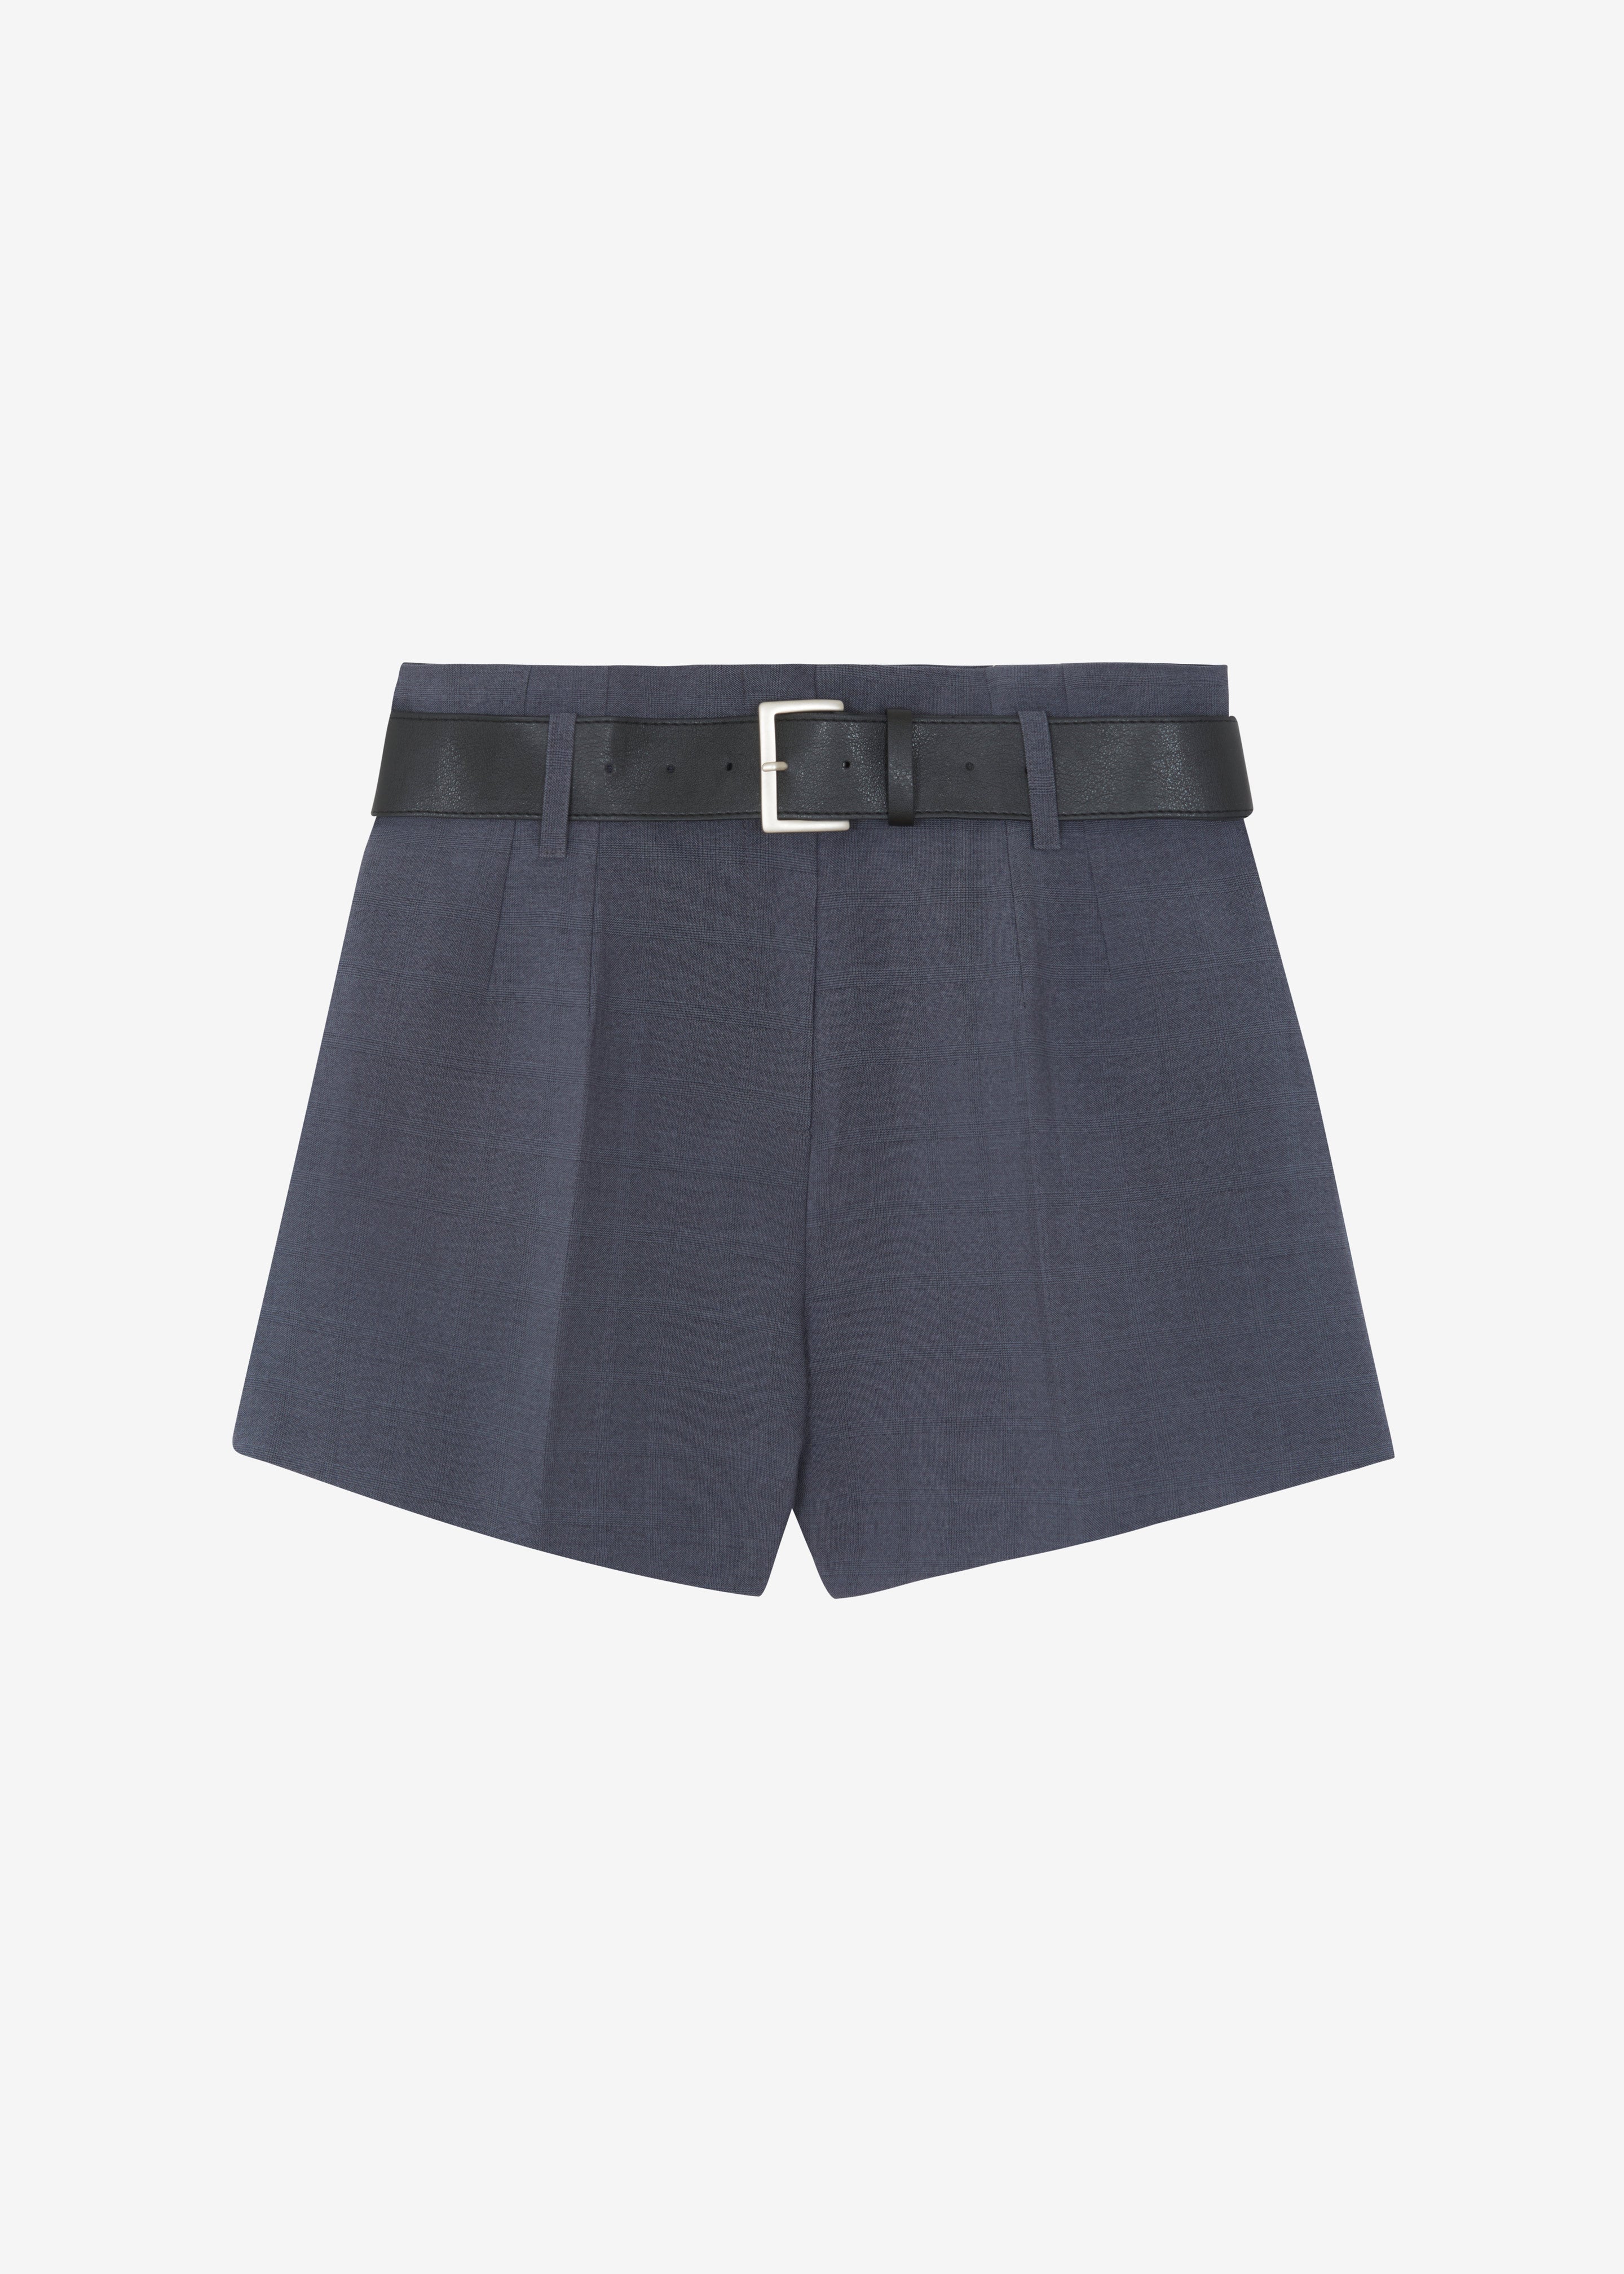 Chappell Belted Shorts - Grey - 14